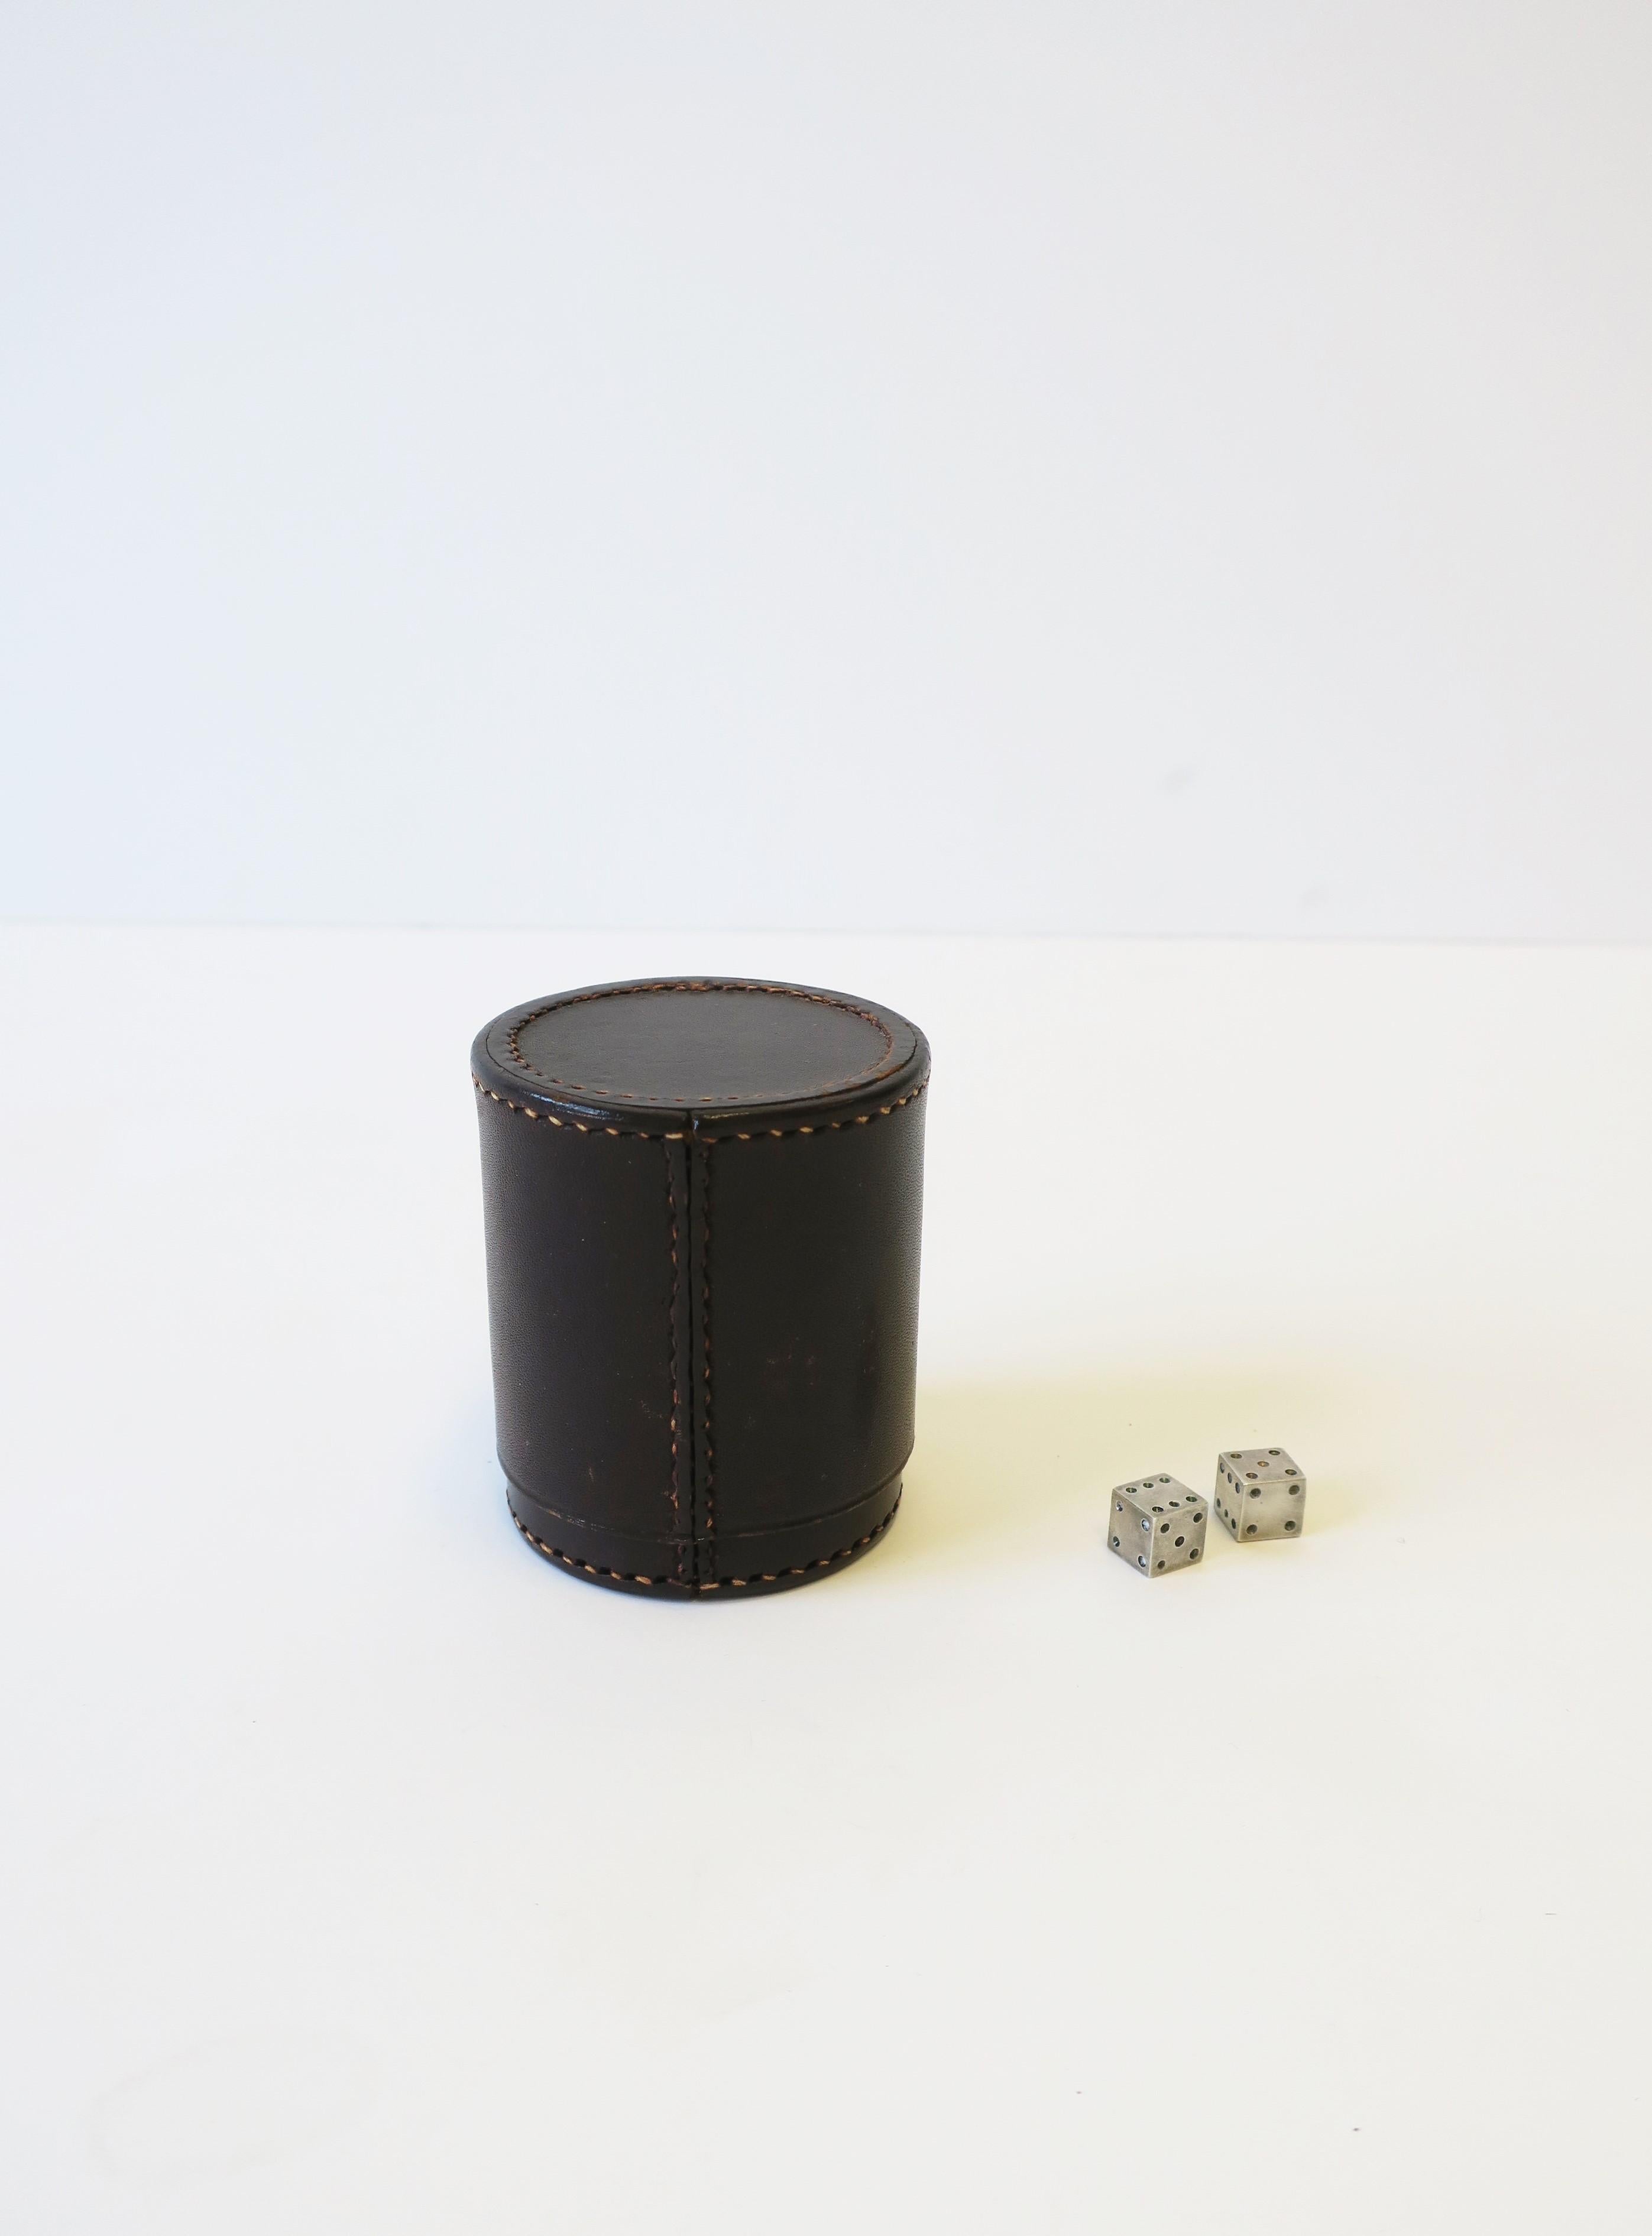 Steel Leather Dice Shaker and Dice Set for Games For Sale